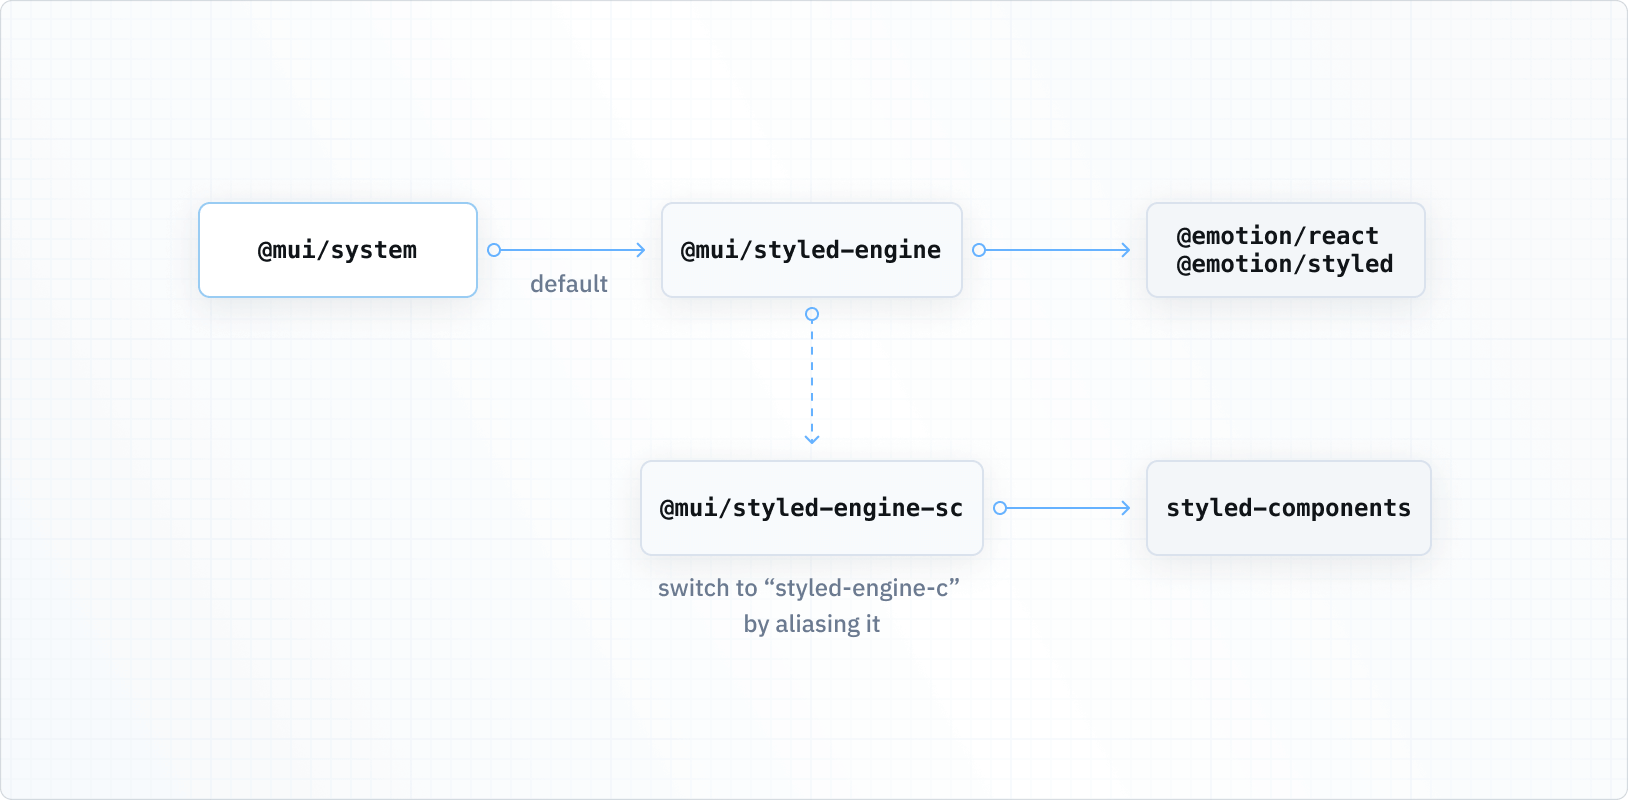 A diagram showing an arrow going from @mui/system to @mui/styled-engine, with a note that it is the default engine. Then, from @mui/styled-engine a solid arrow points to @emotion/react and @emotion/styled while a dashed arrow points to @mui/styled-engine-sc, which points to styled-components.